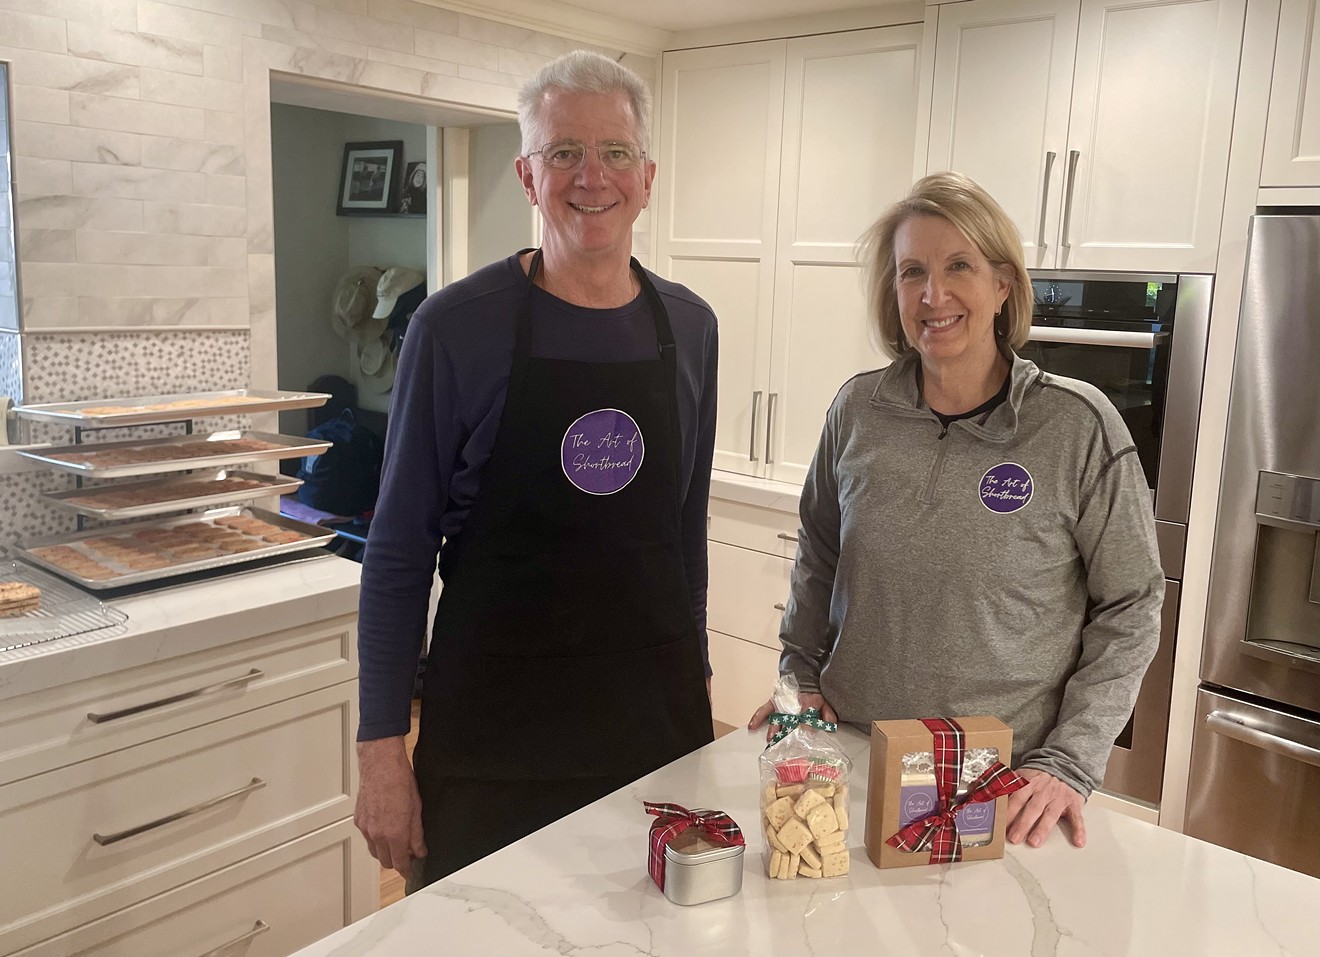 The holiday season for The Art of Shortbread owners Art and Kathy Rowland is their busiest time of year.